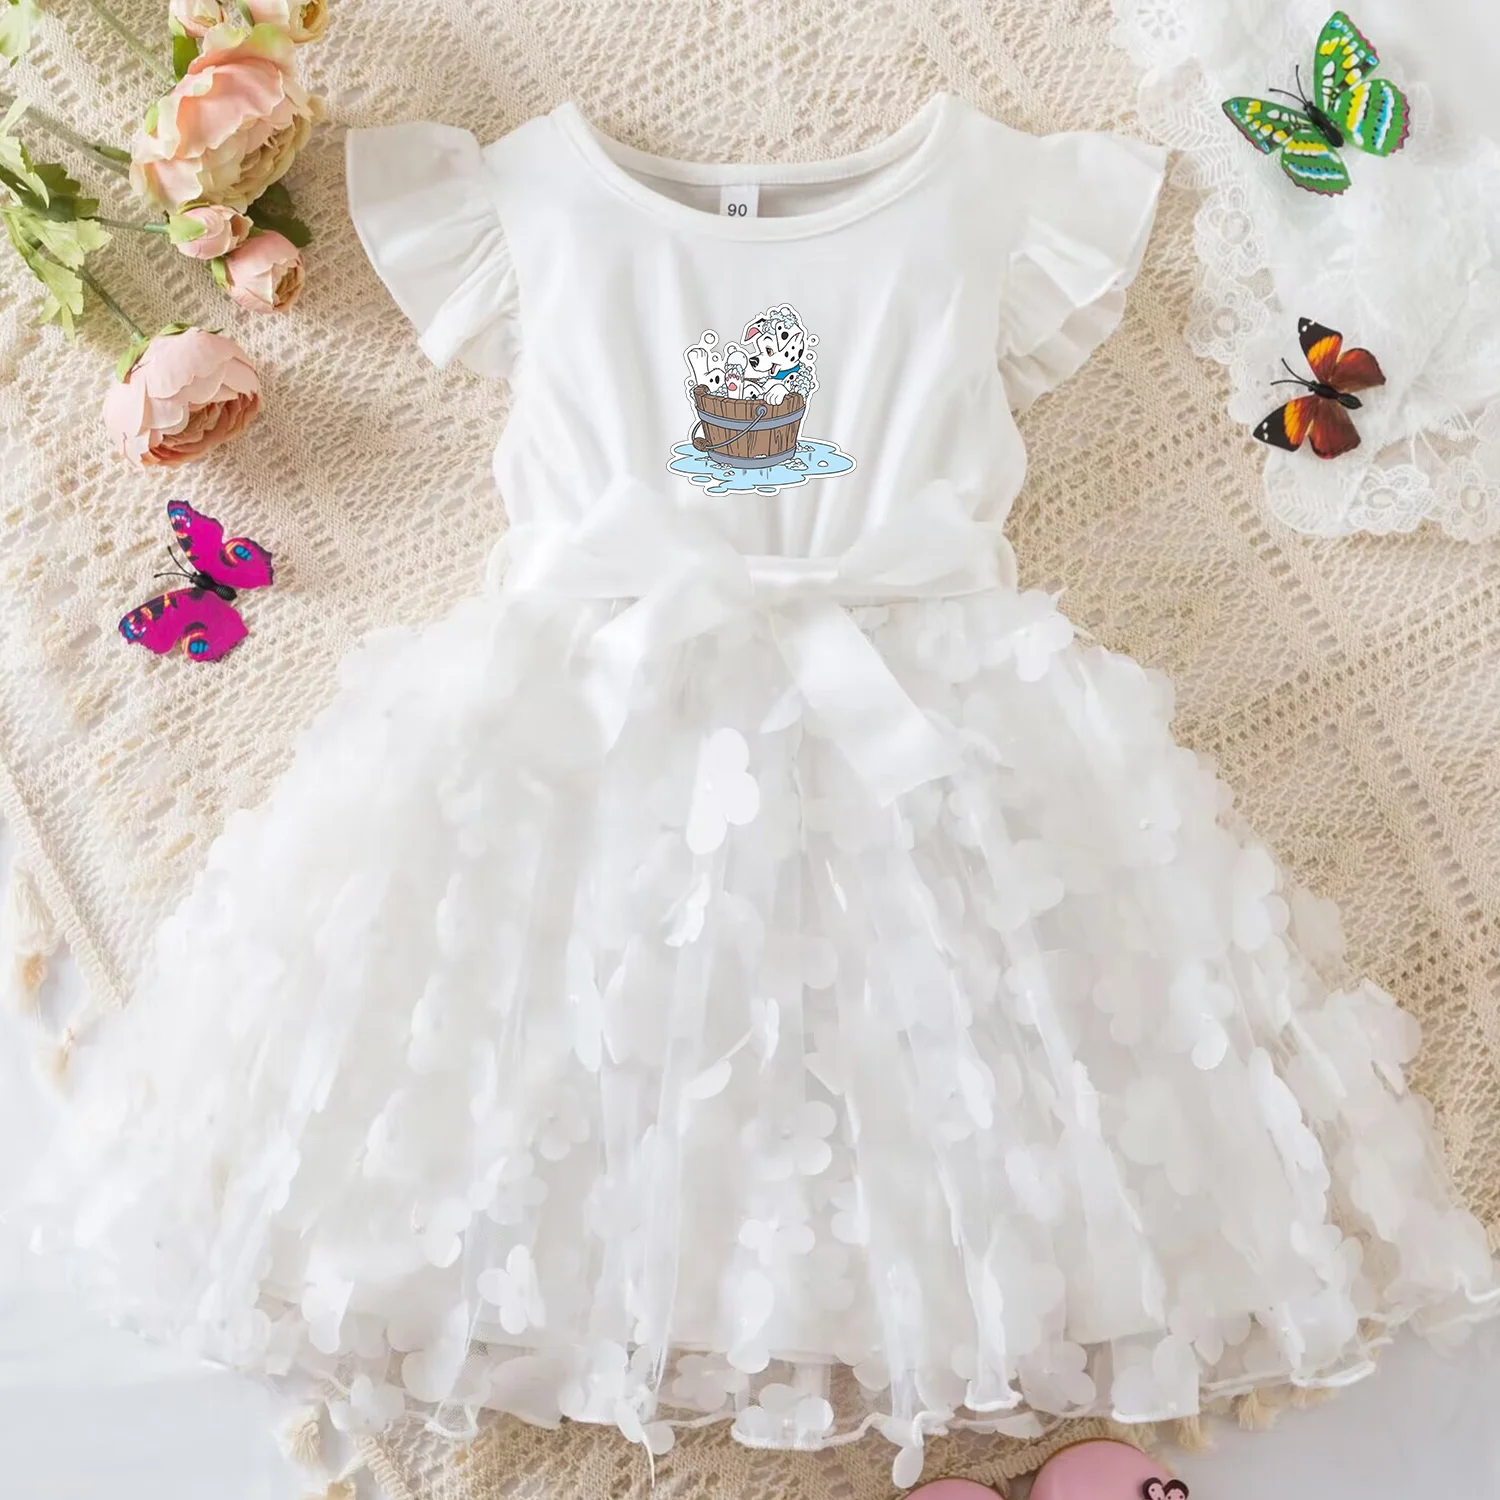 

101 Dalmatians Baby Party Dresses Summer Dress for Kid's Casual Clothes Girls Princess Dress 3D Butterfly Cute 2-6 Yrs